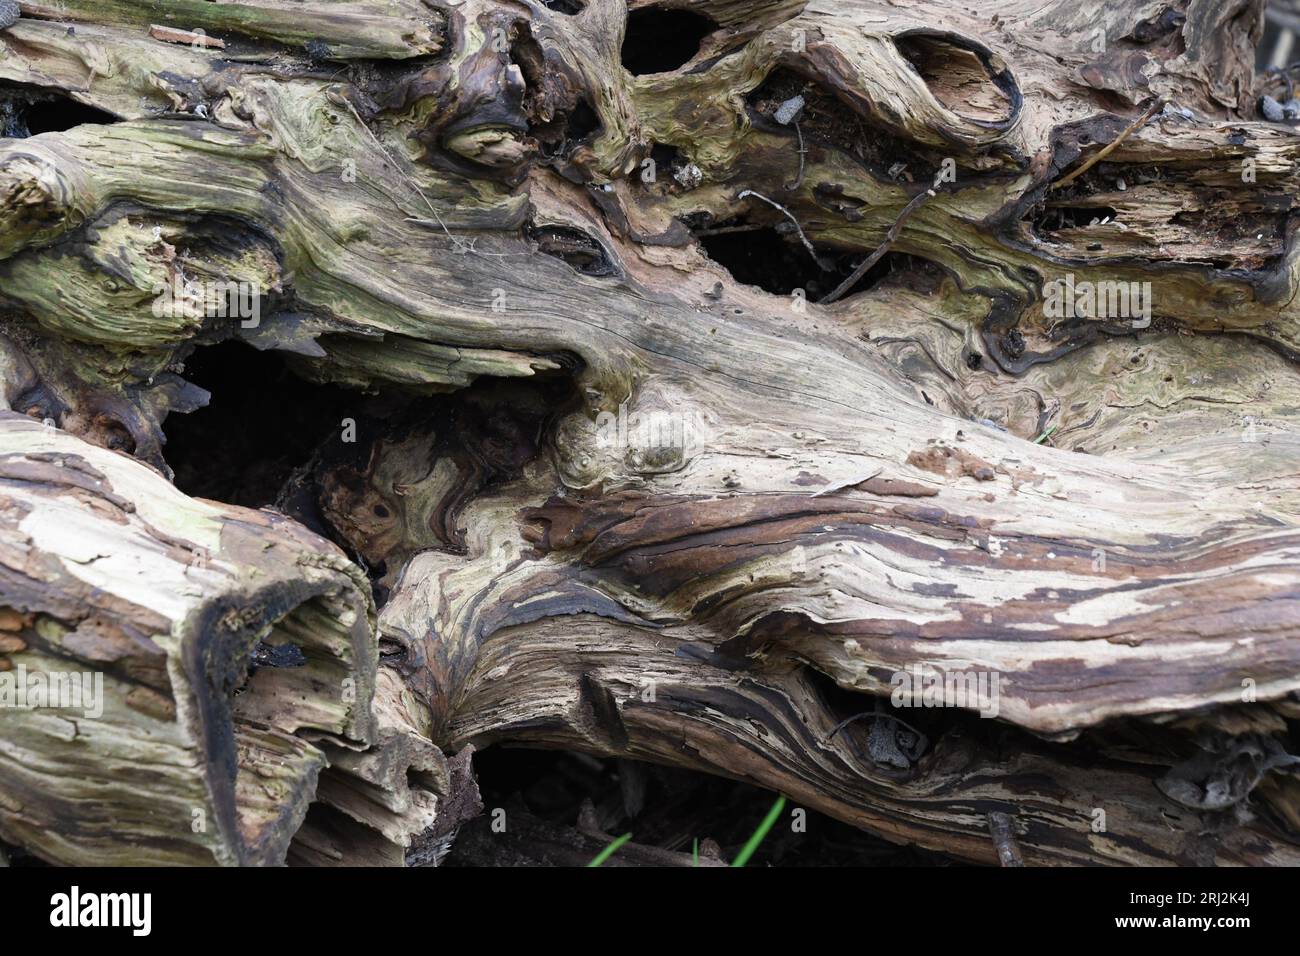 Abstract shapes and varied colours of an old tree stump created by weathering, rotting and insect action, Stock Photo